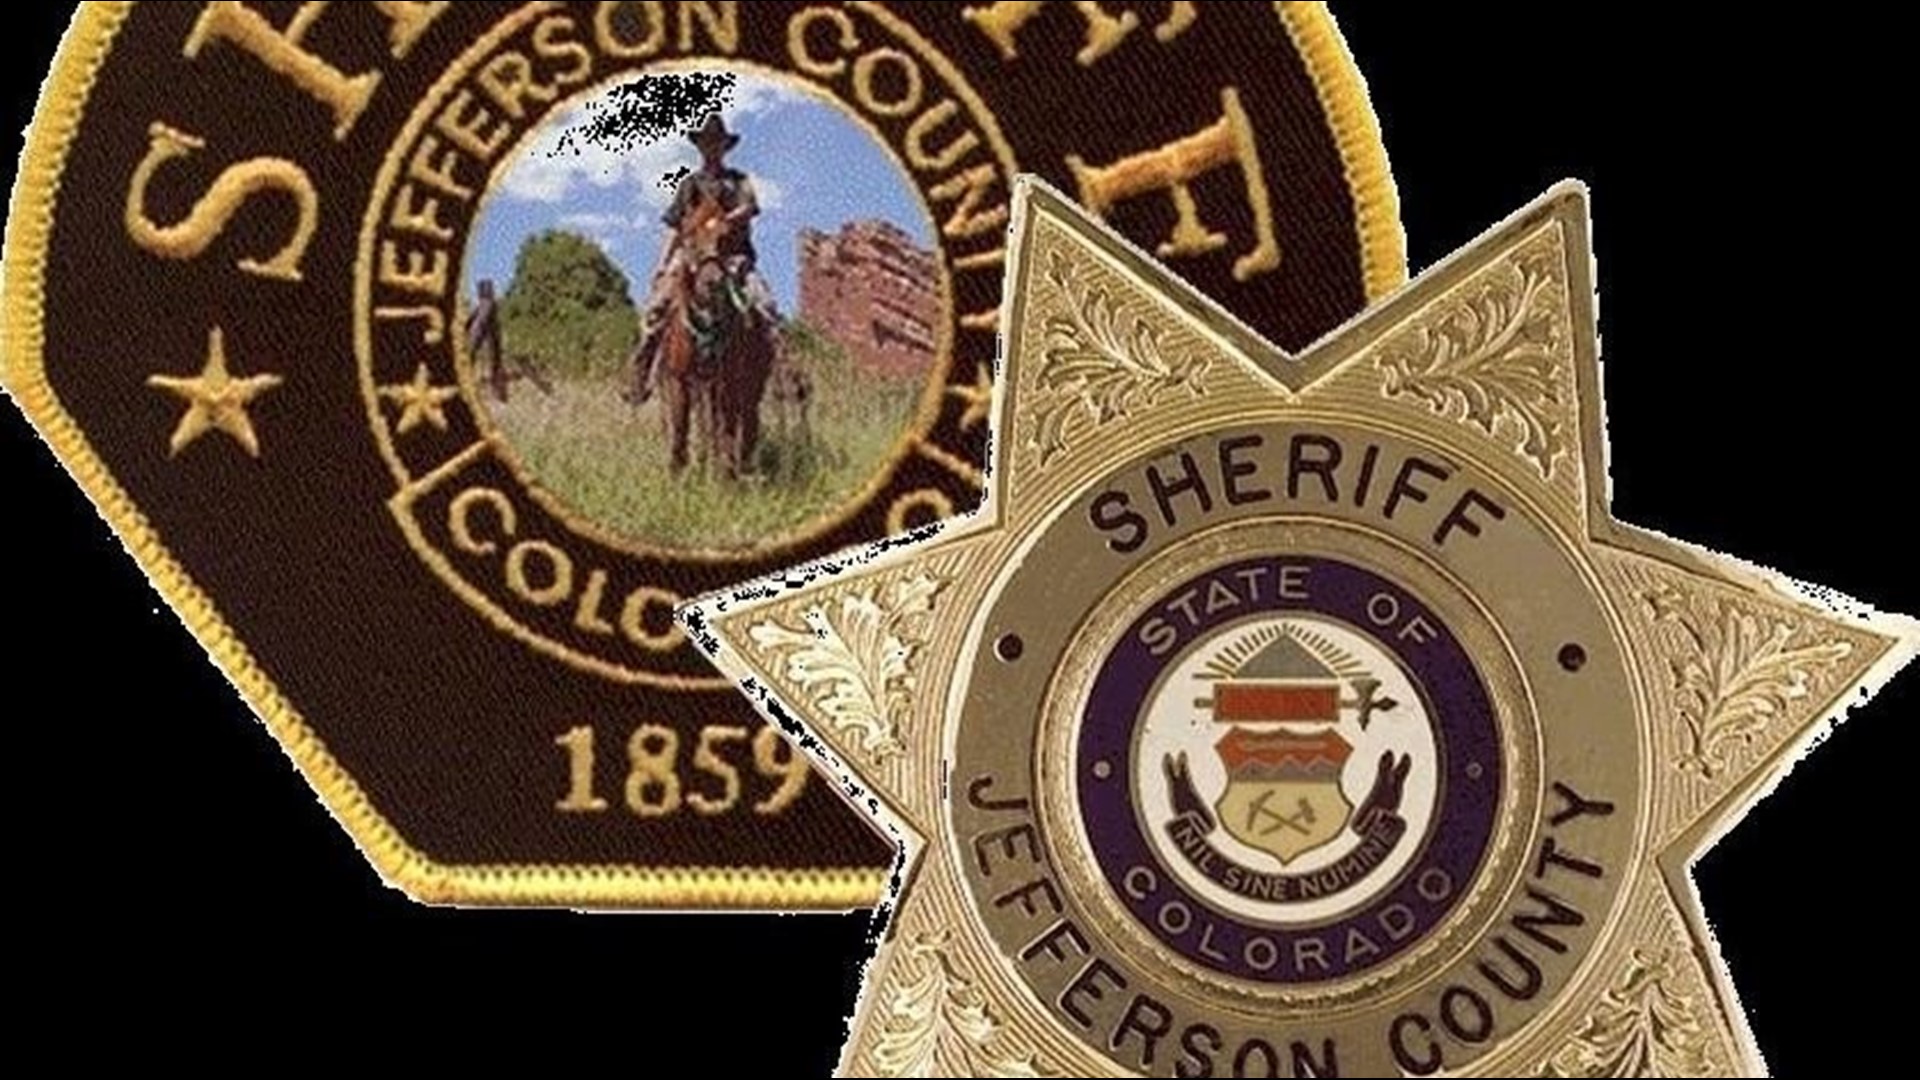 The Jefferson County Sheriff's Office must reduce its budget by $6.7 million, according to a release from the department.